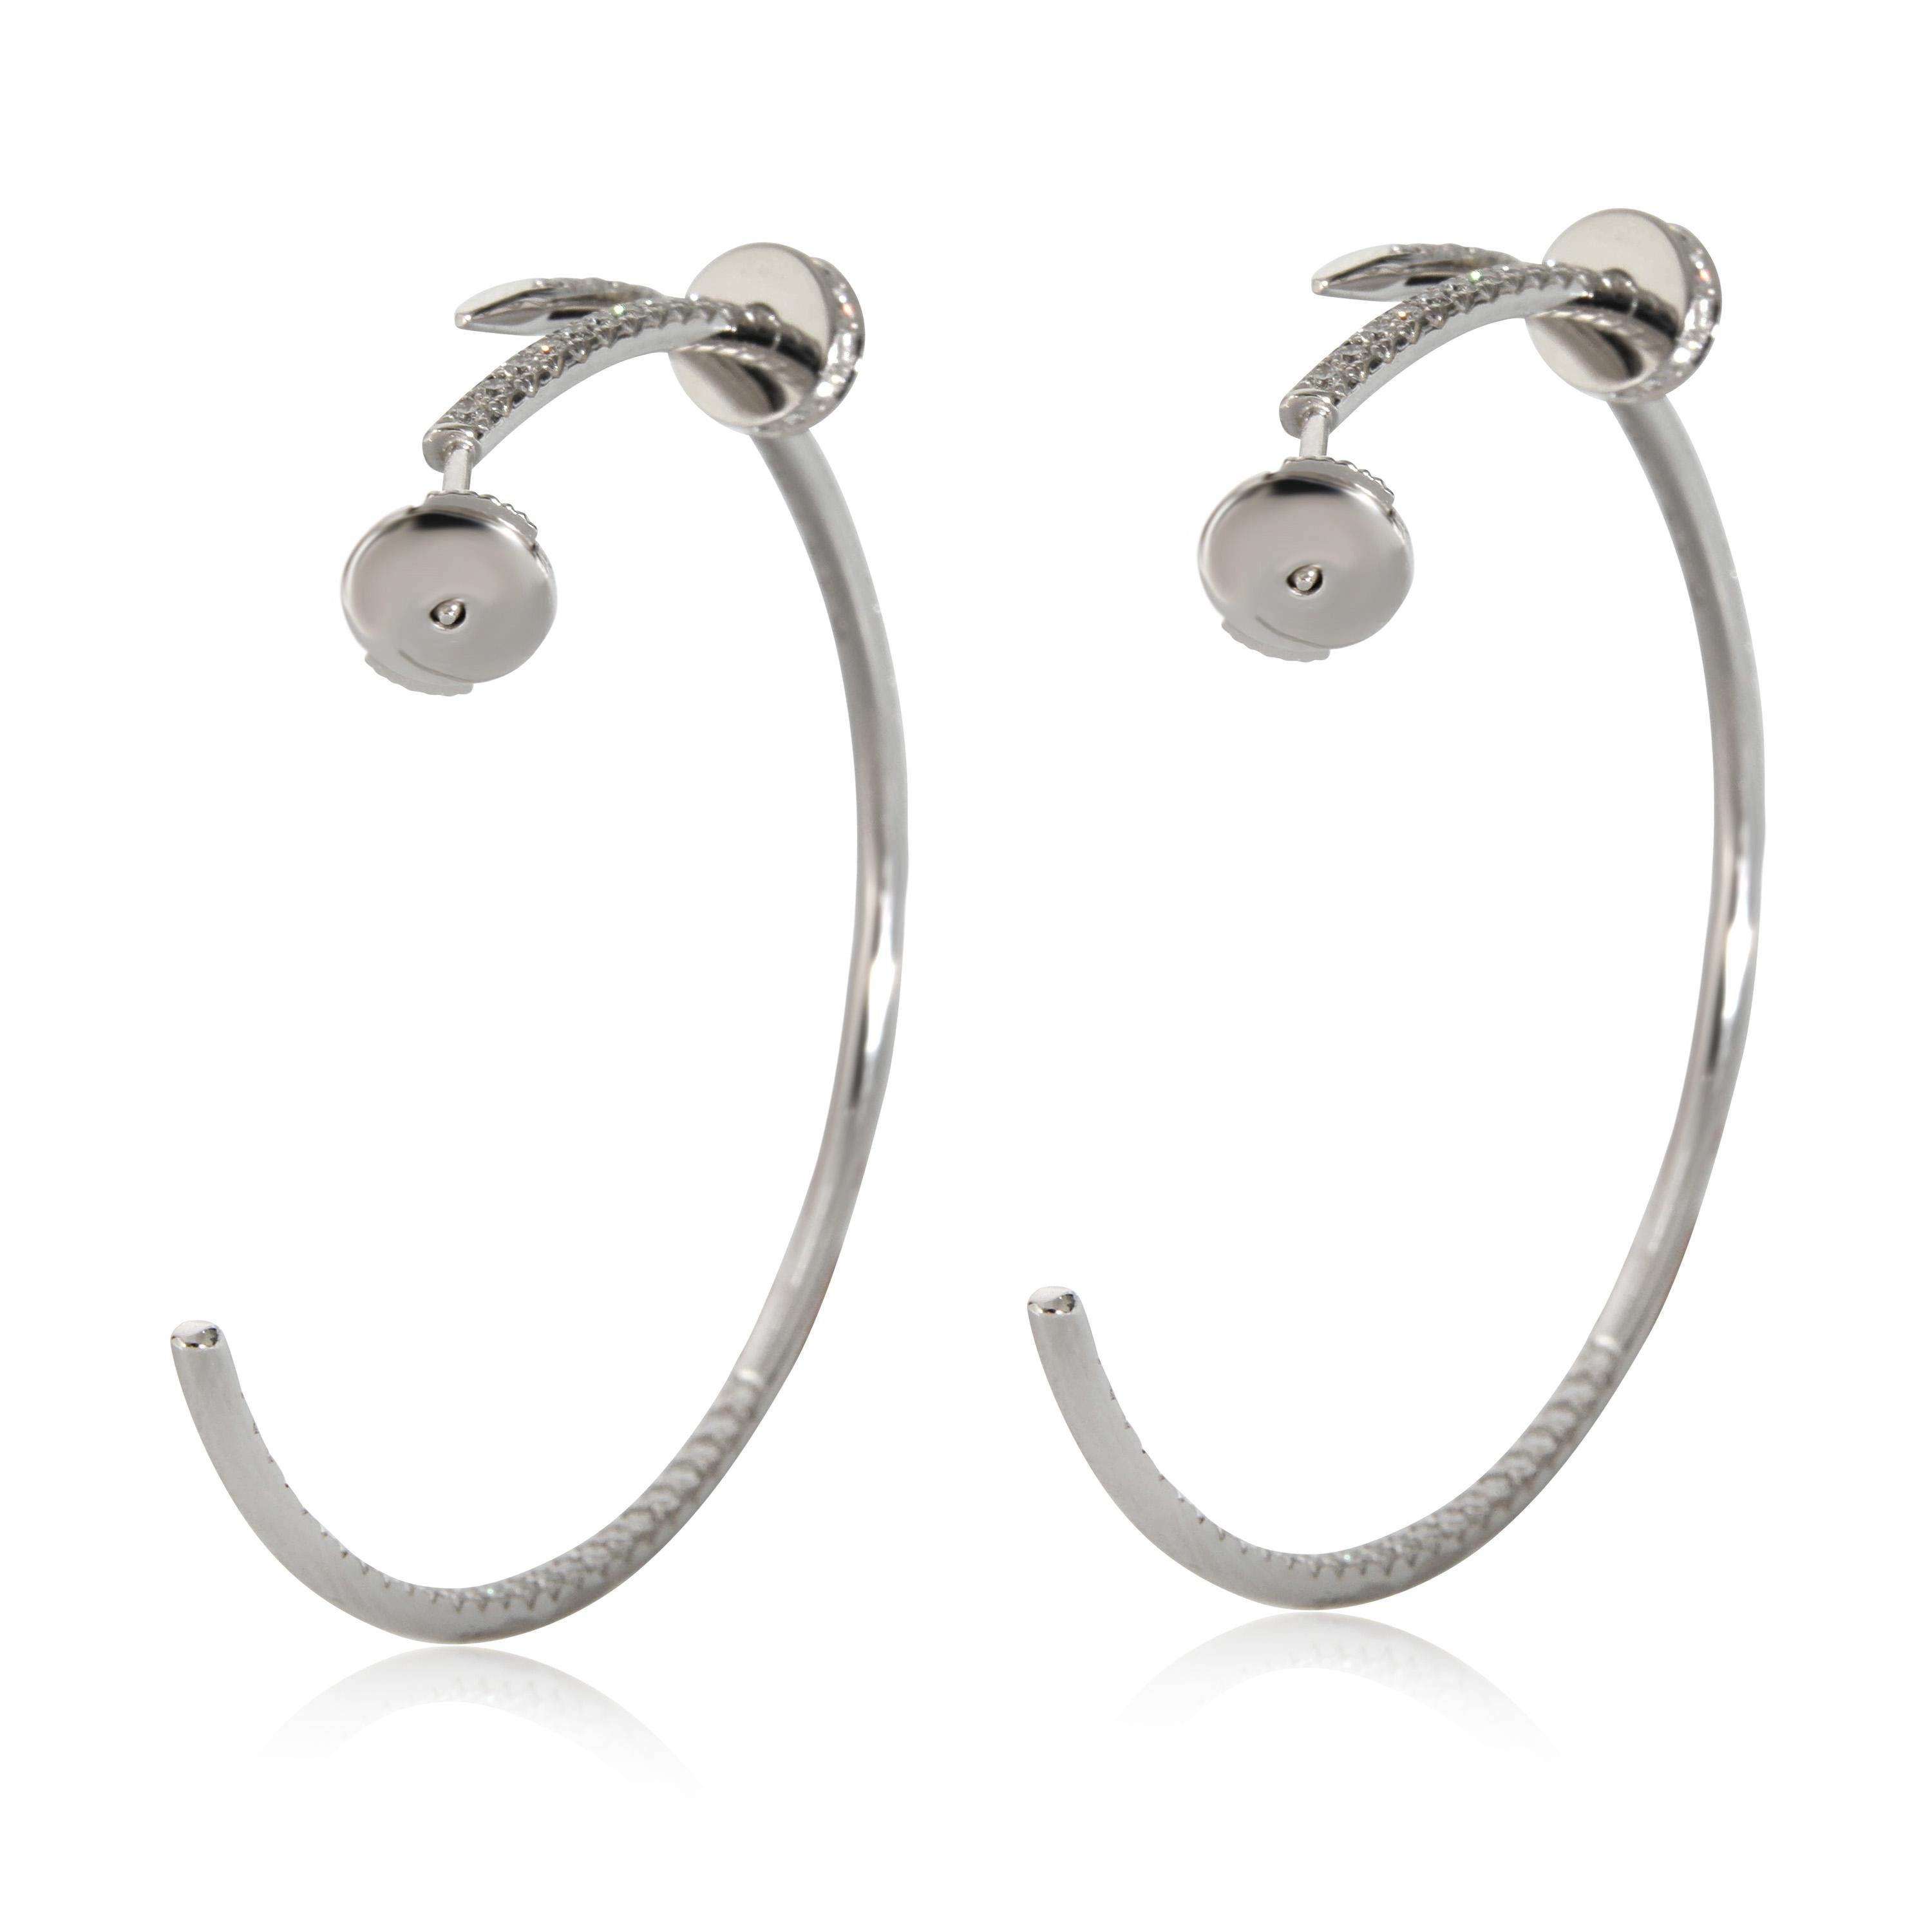 Cartier Juste Un Clou Diamond Hoop Earring in 18K White Gold 1.26 CTW

PRIMARY DETAILS
SKU: 131692
Listing Title: Cartier Juste Un Clou Diamond Hoop Earring in 18K White Gold 1.26 CTW
Condition Description: Translating to 'just a nail', the Juste Un